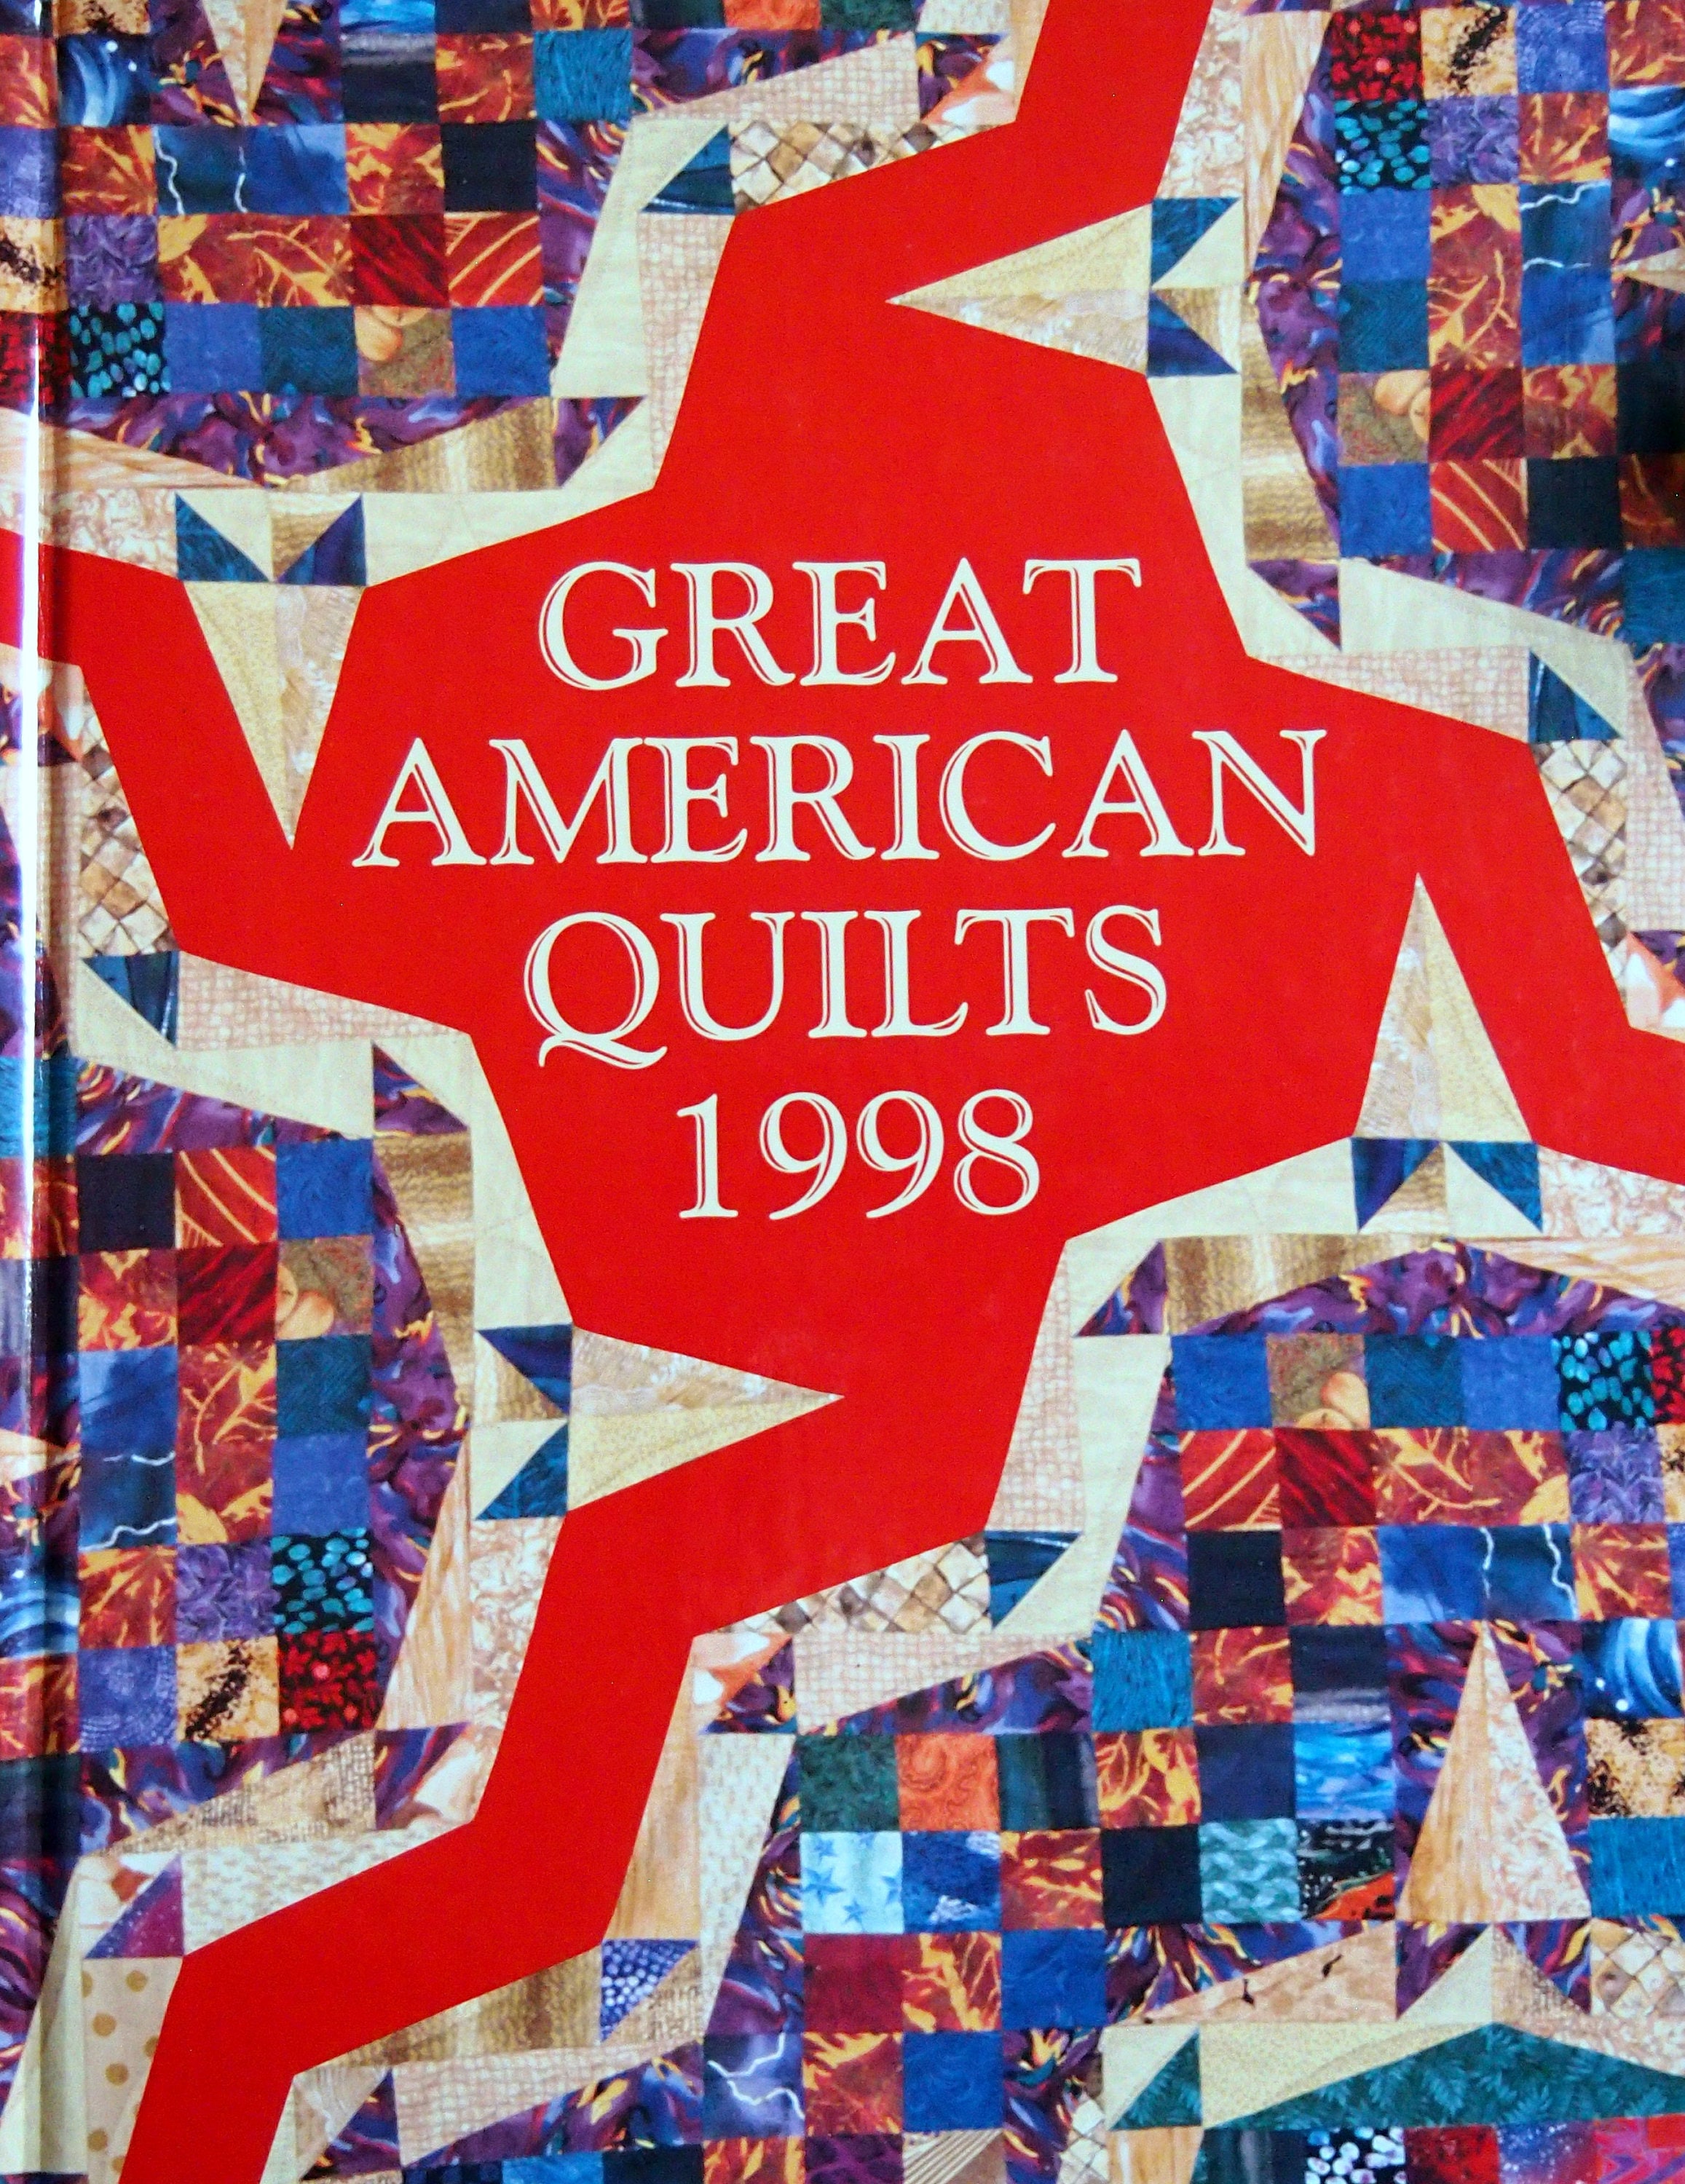 Great American Quilts - Quilt Pattern Books - Hardback - 1987-1989